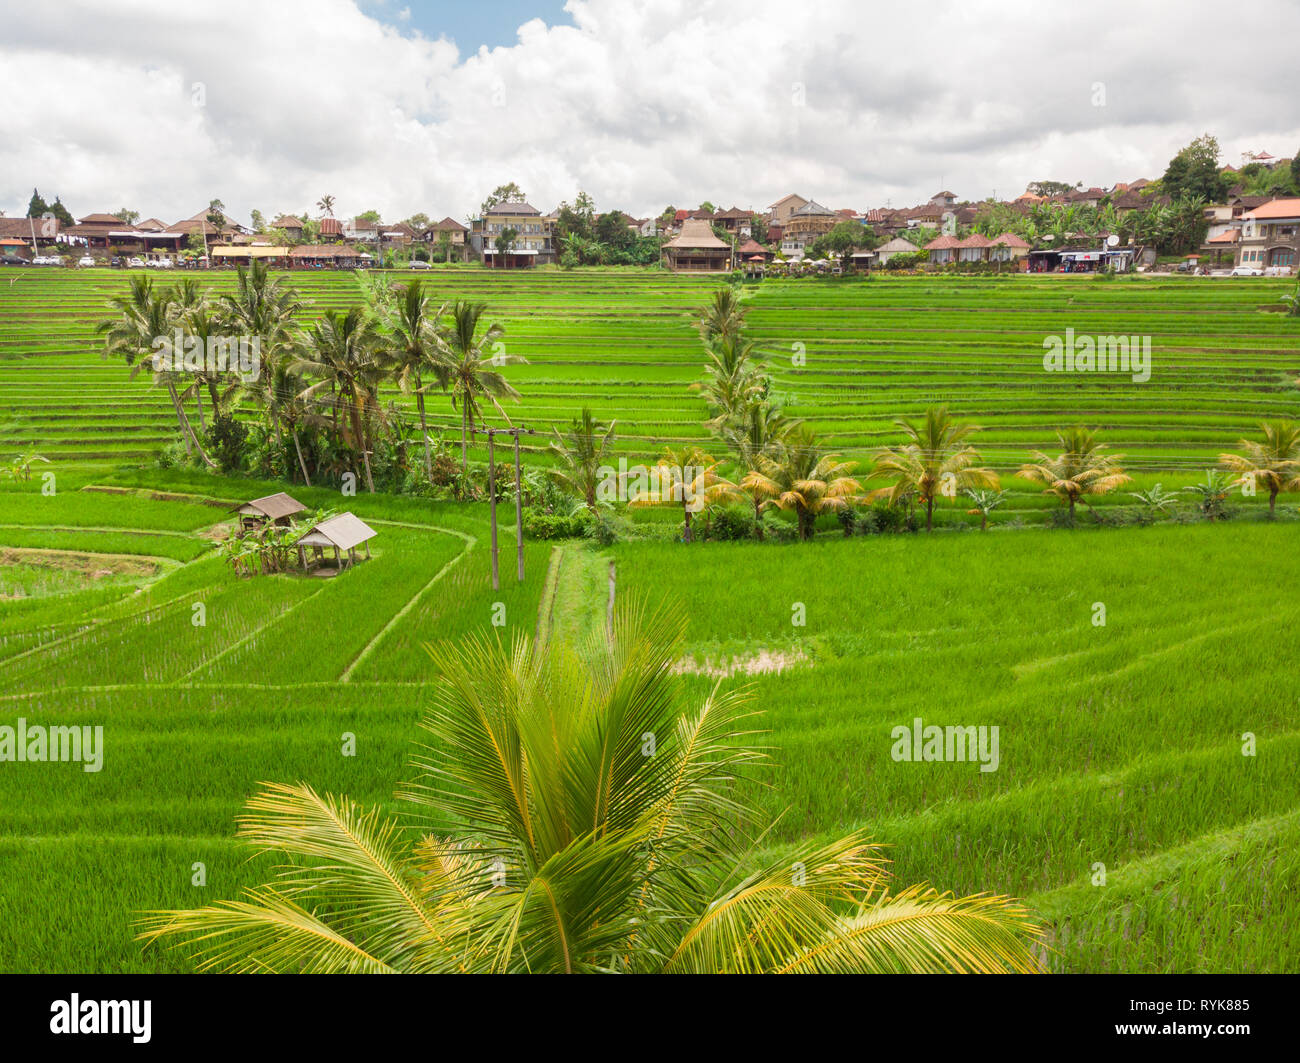 Jatiluwih rice terraces and plantation in Bali, Indonesia, with palm trees and paths. Stock Photo